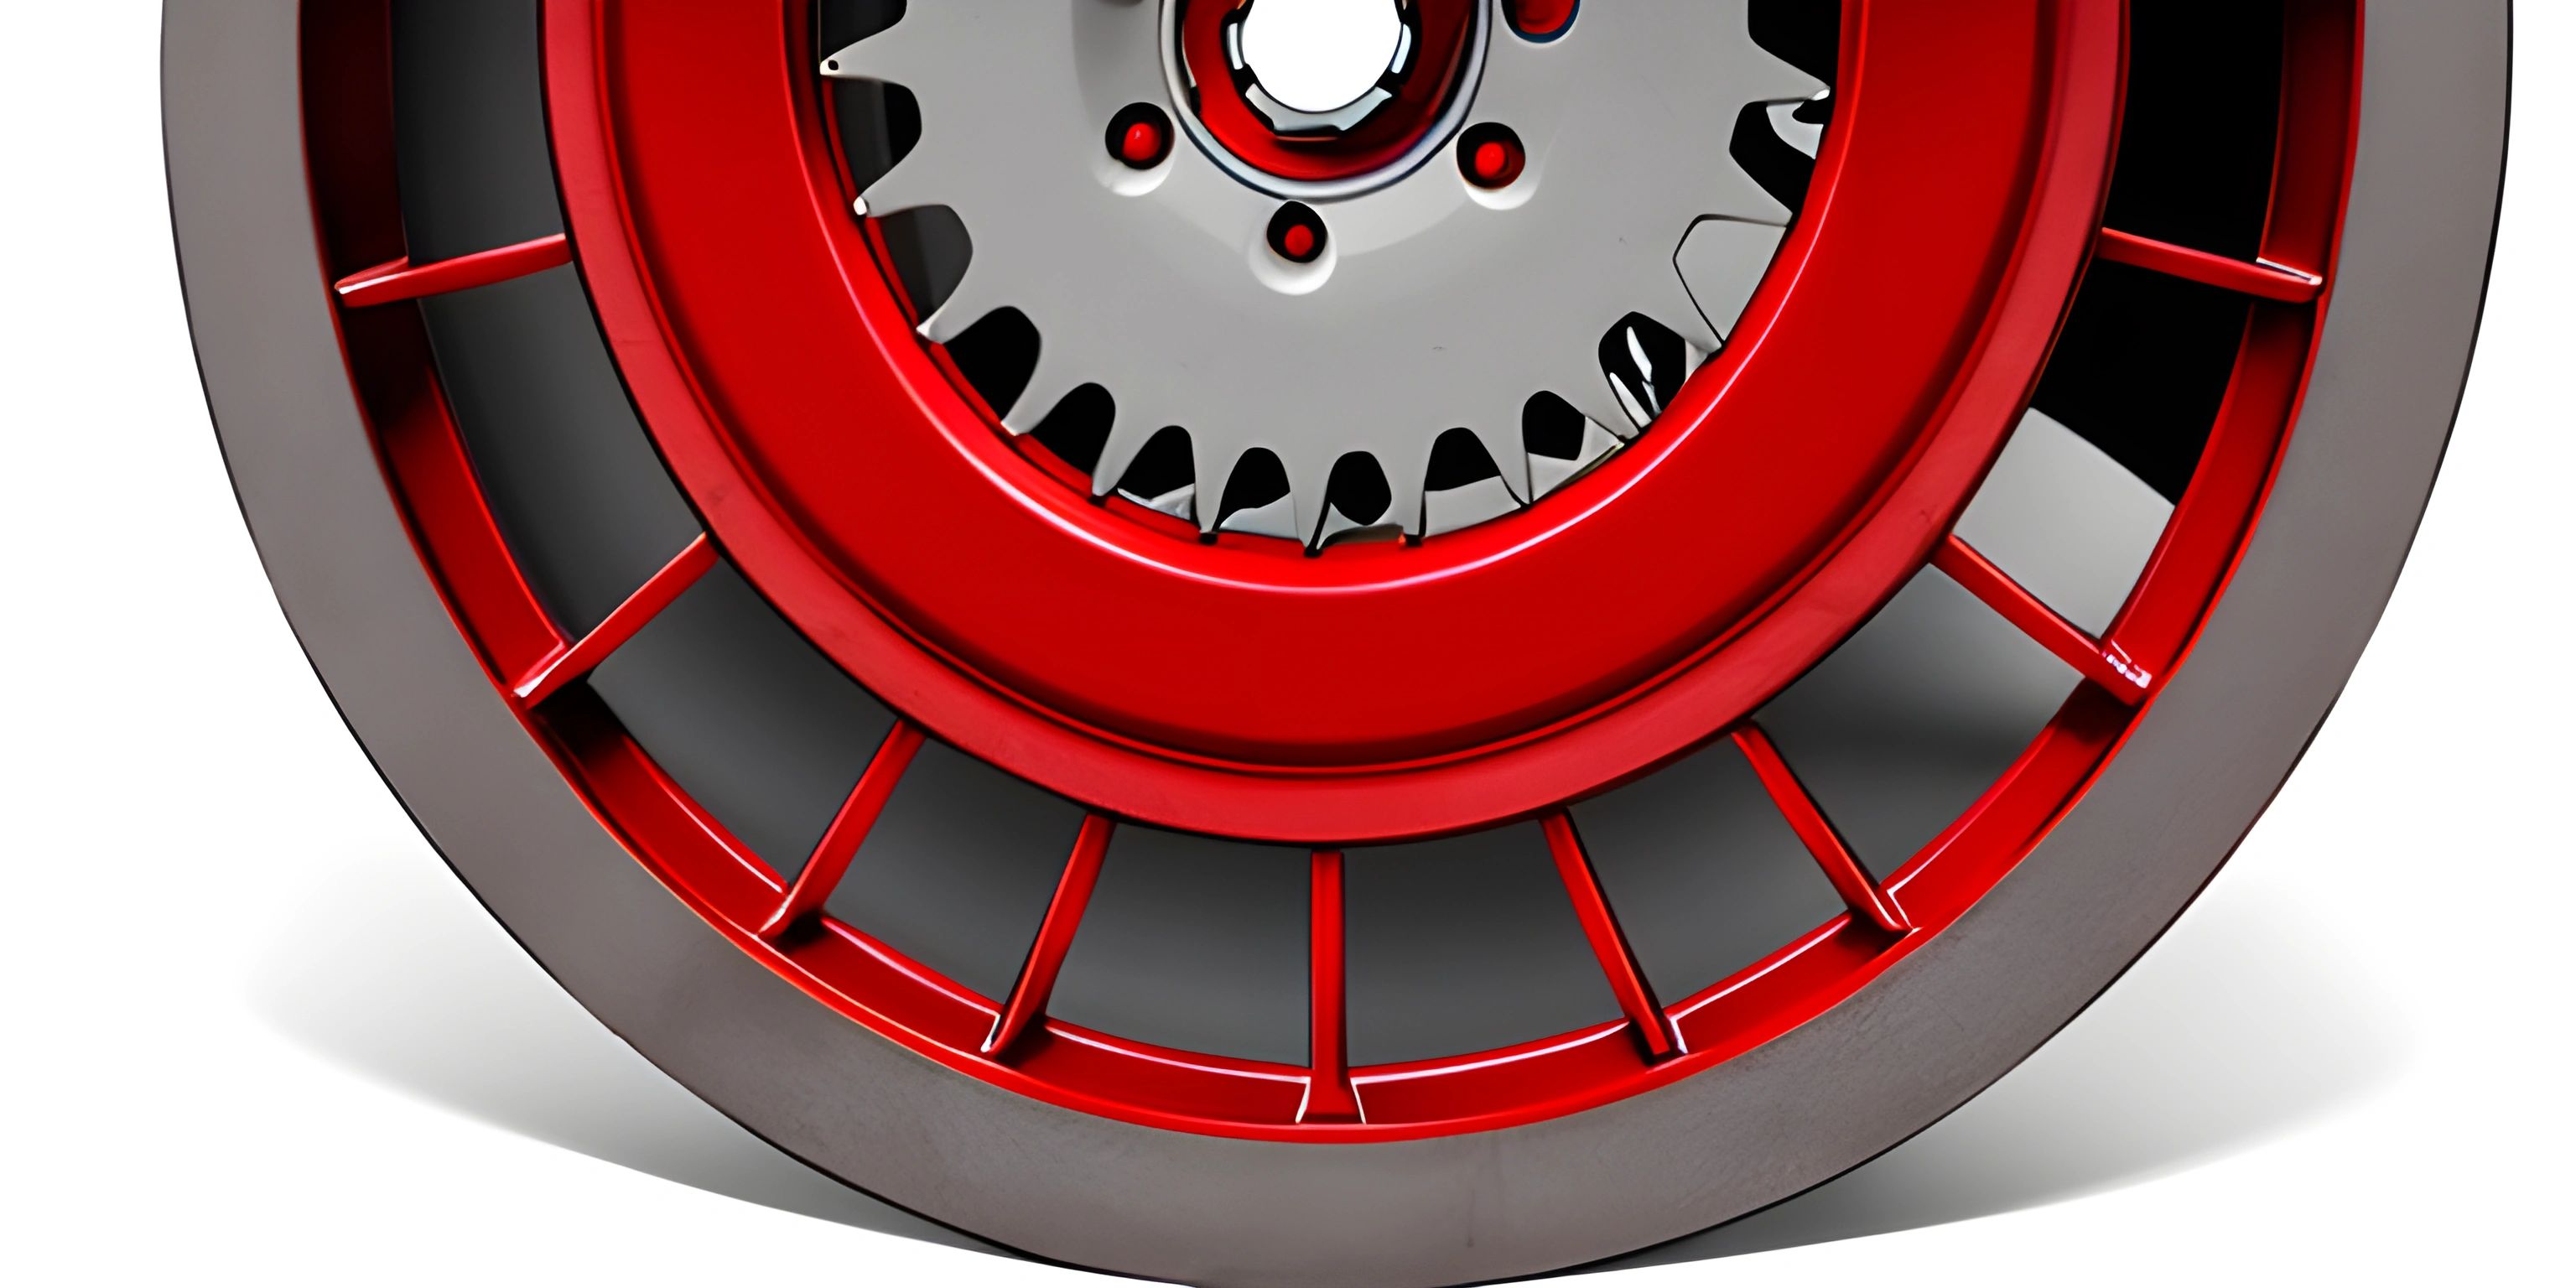 the front wheel of a vehicle has spokes on it for protection on the tires